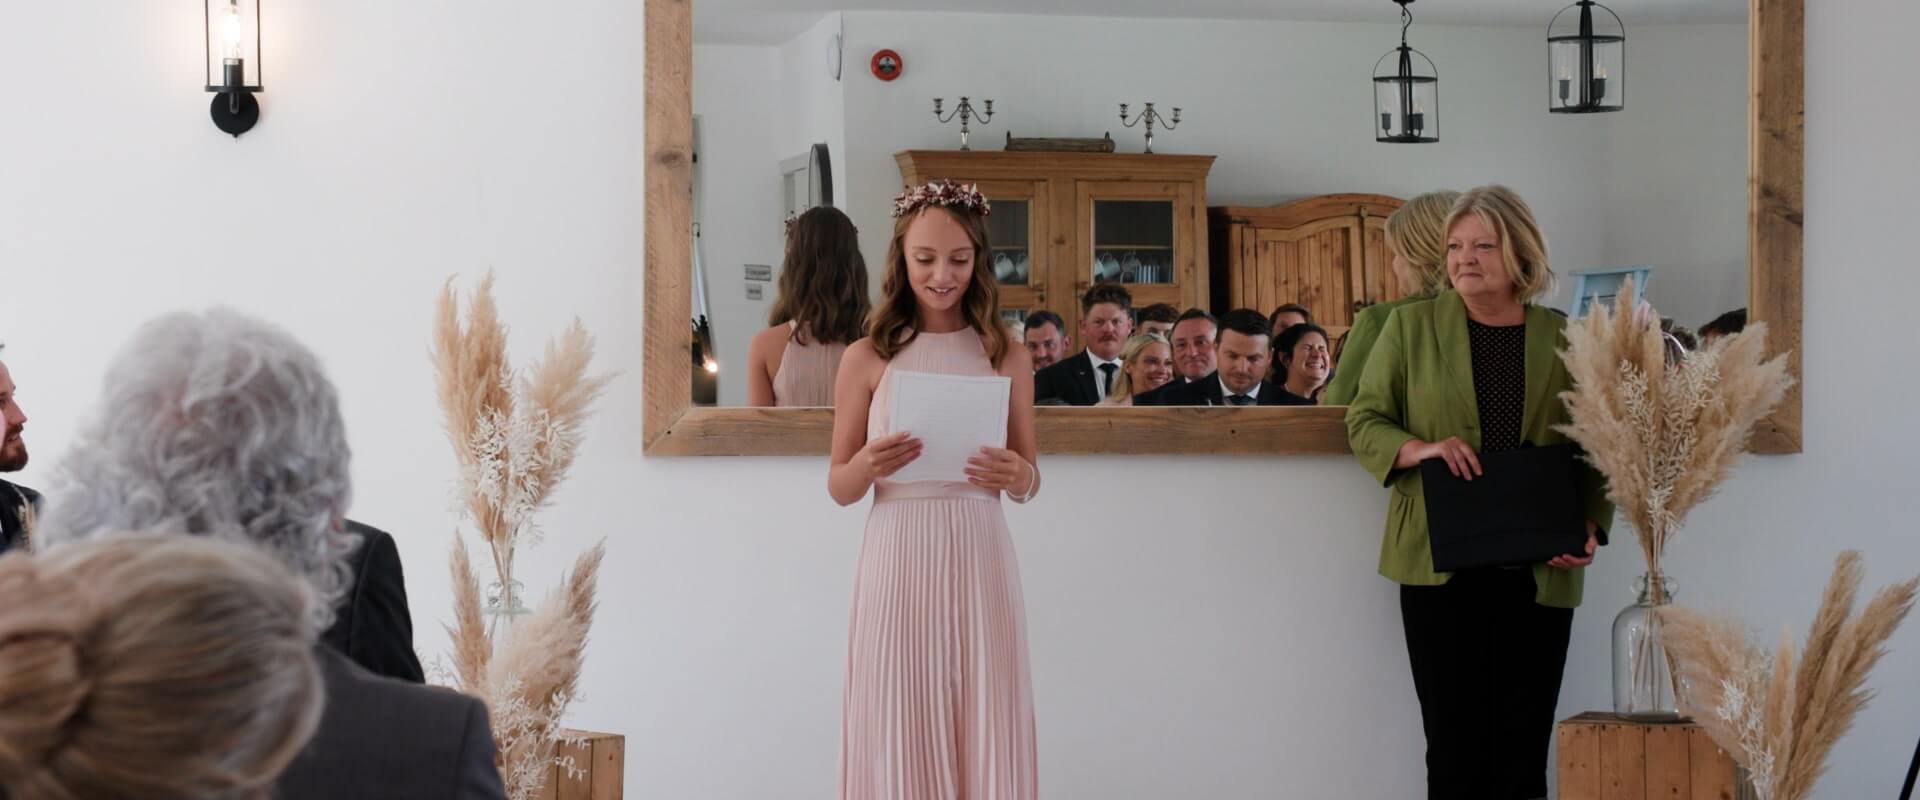 Michelles daughter (bridesmaid) perfoming a reading during the wedding ceremony